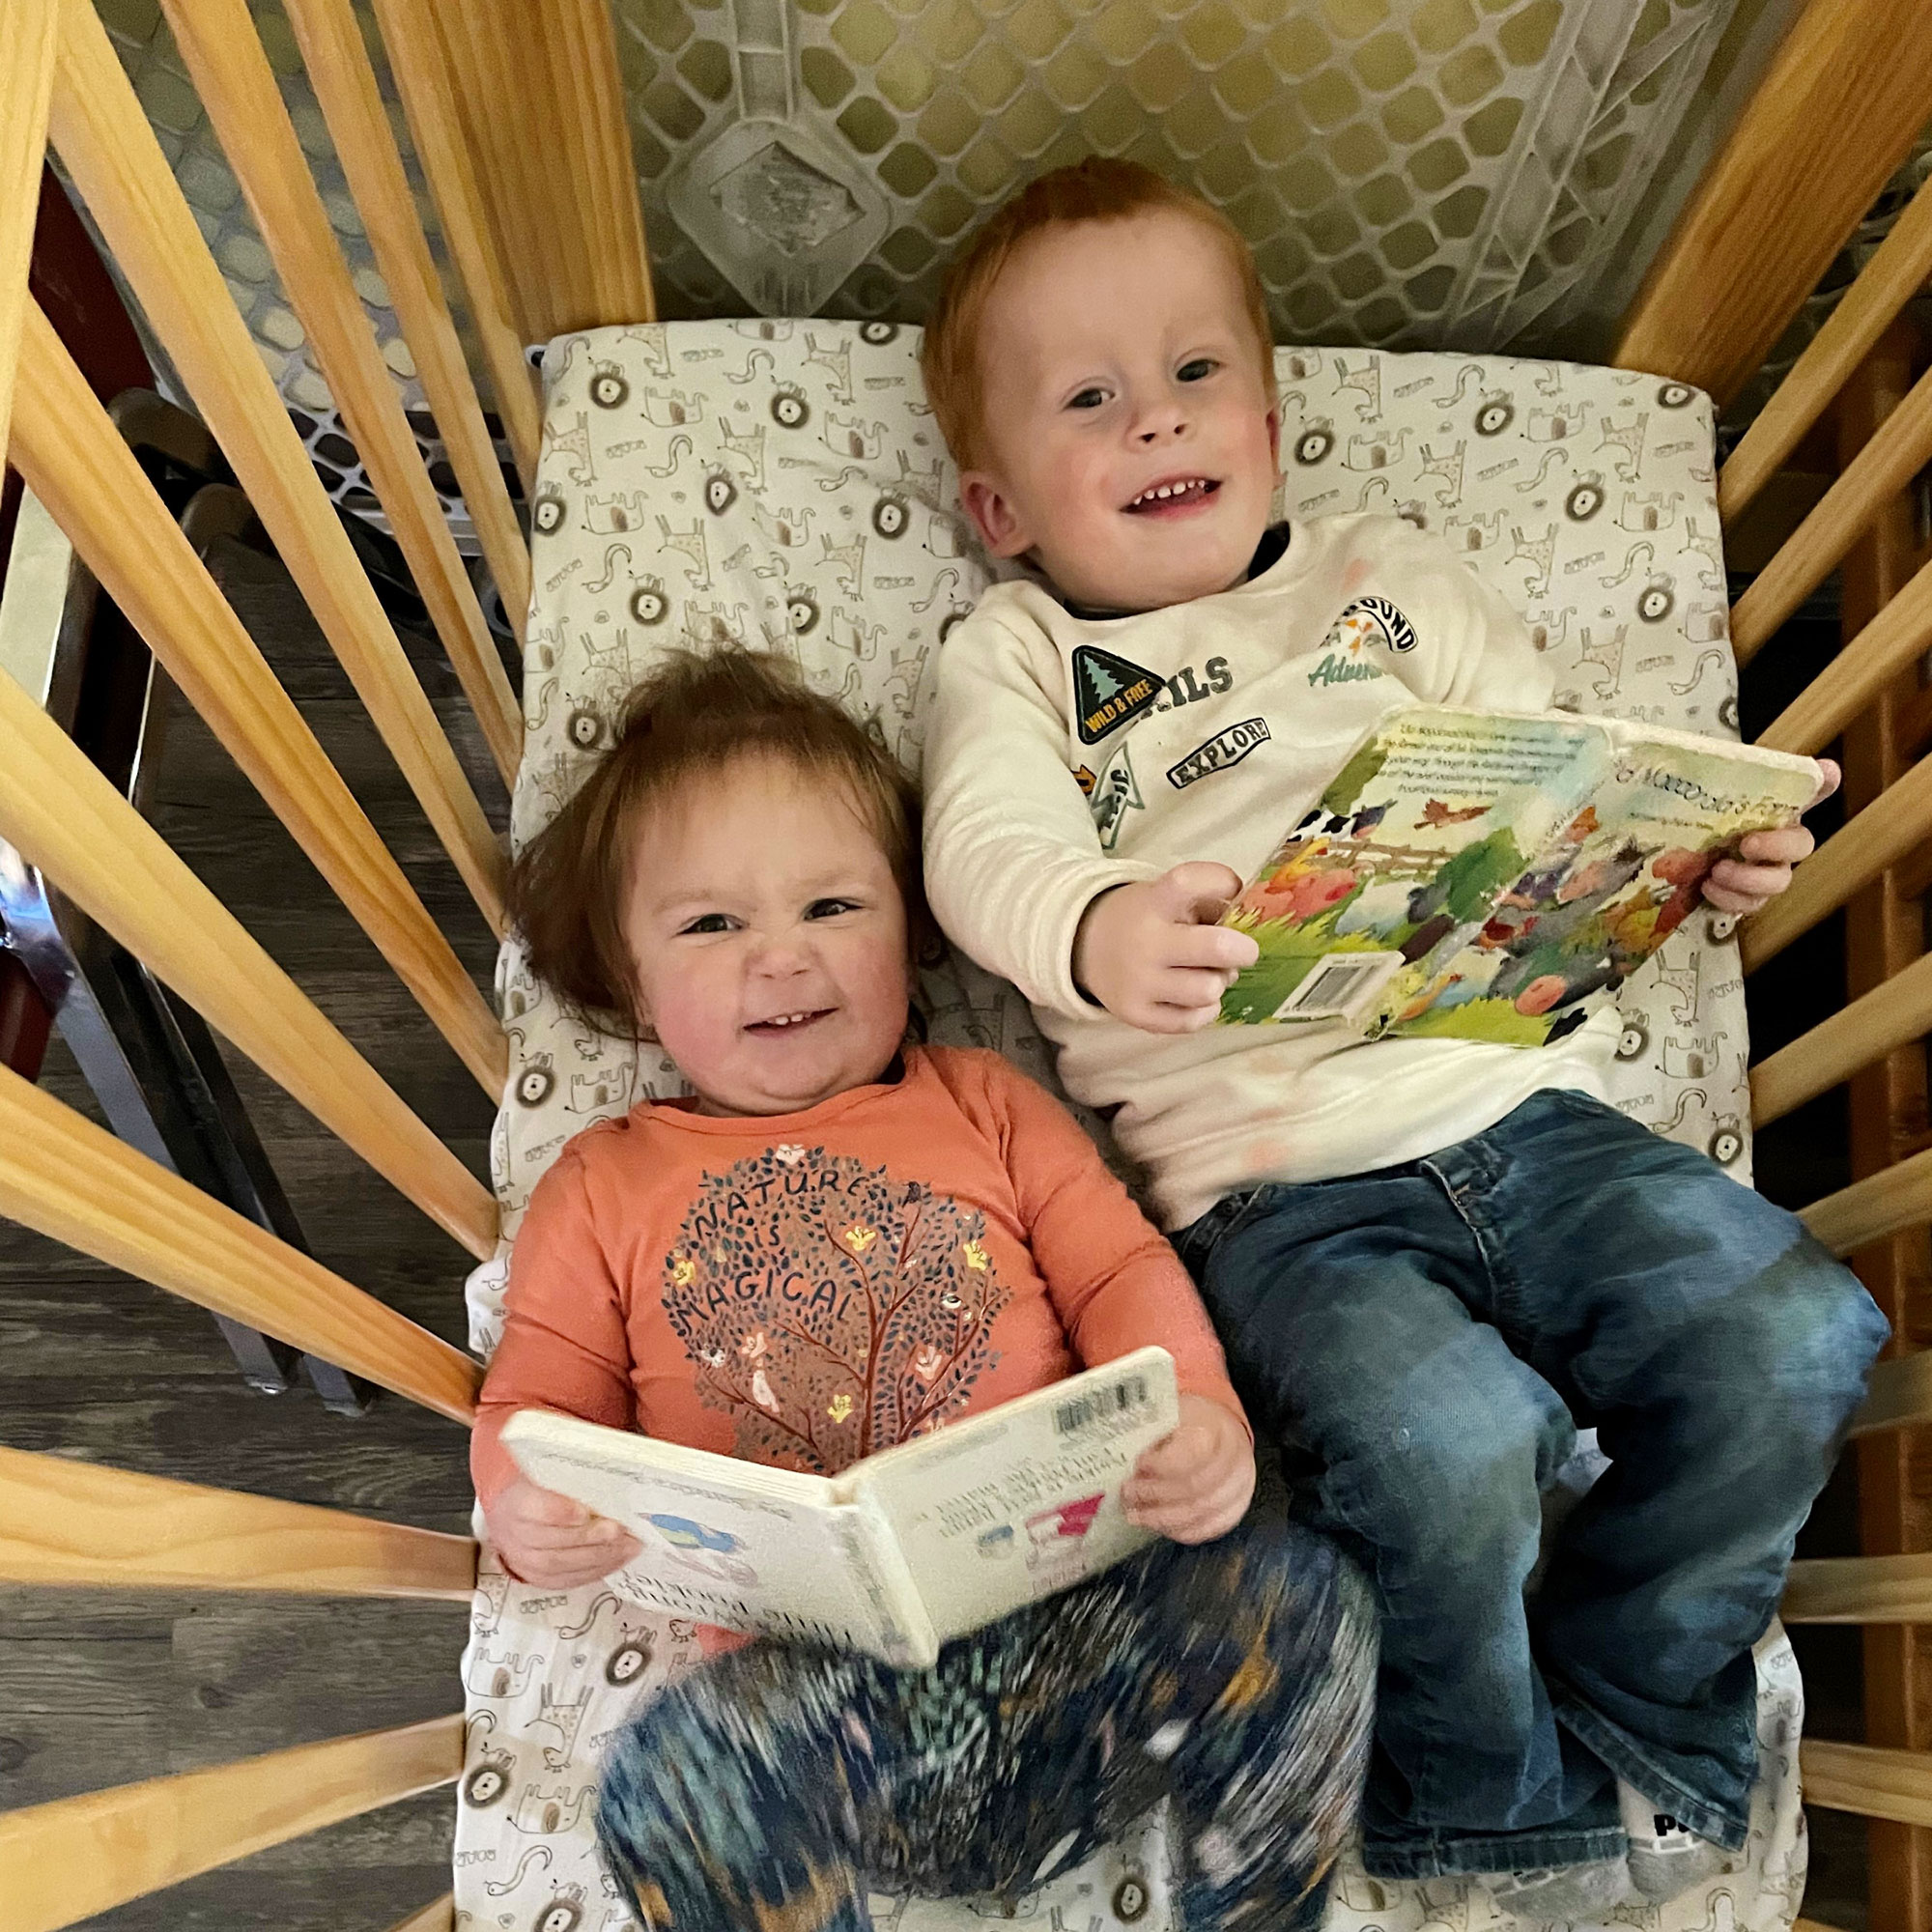 Two toddlers read books and giggle in a crib together.